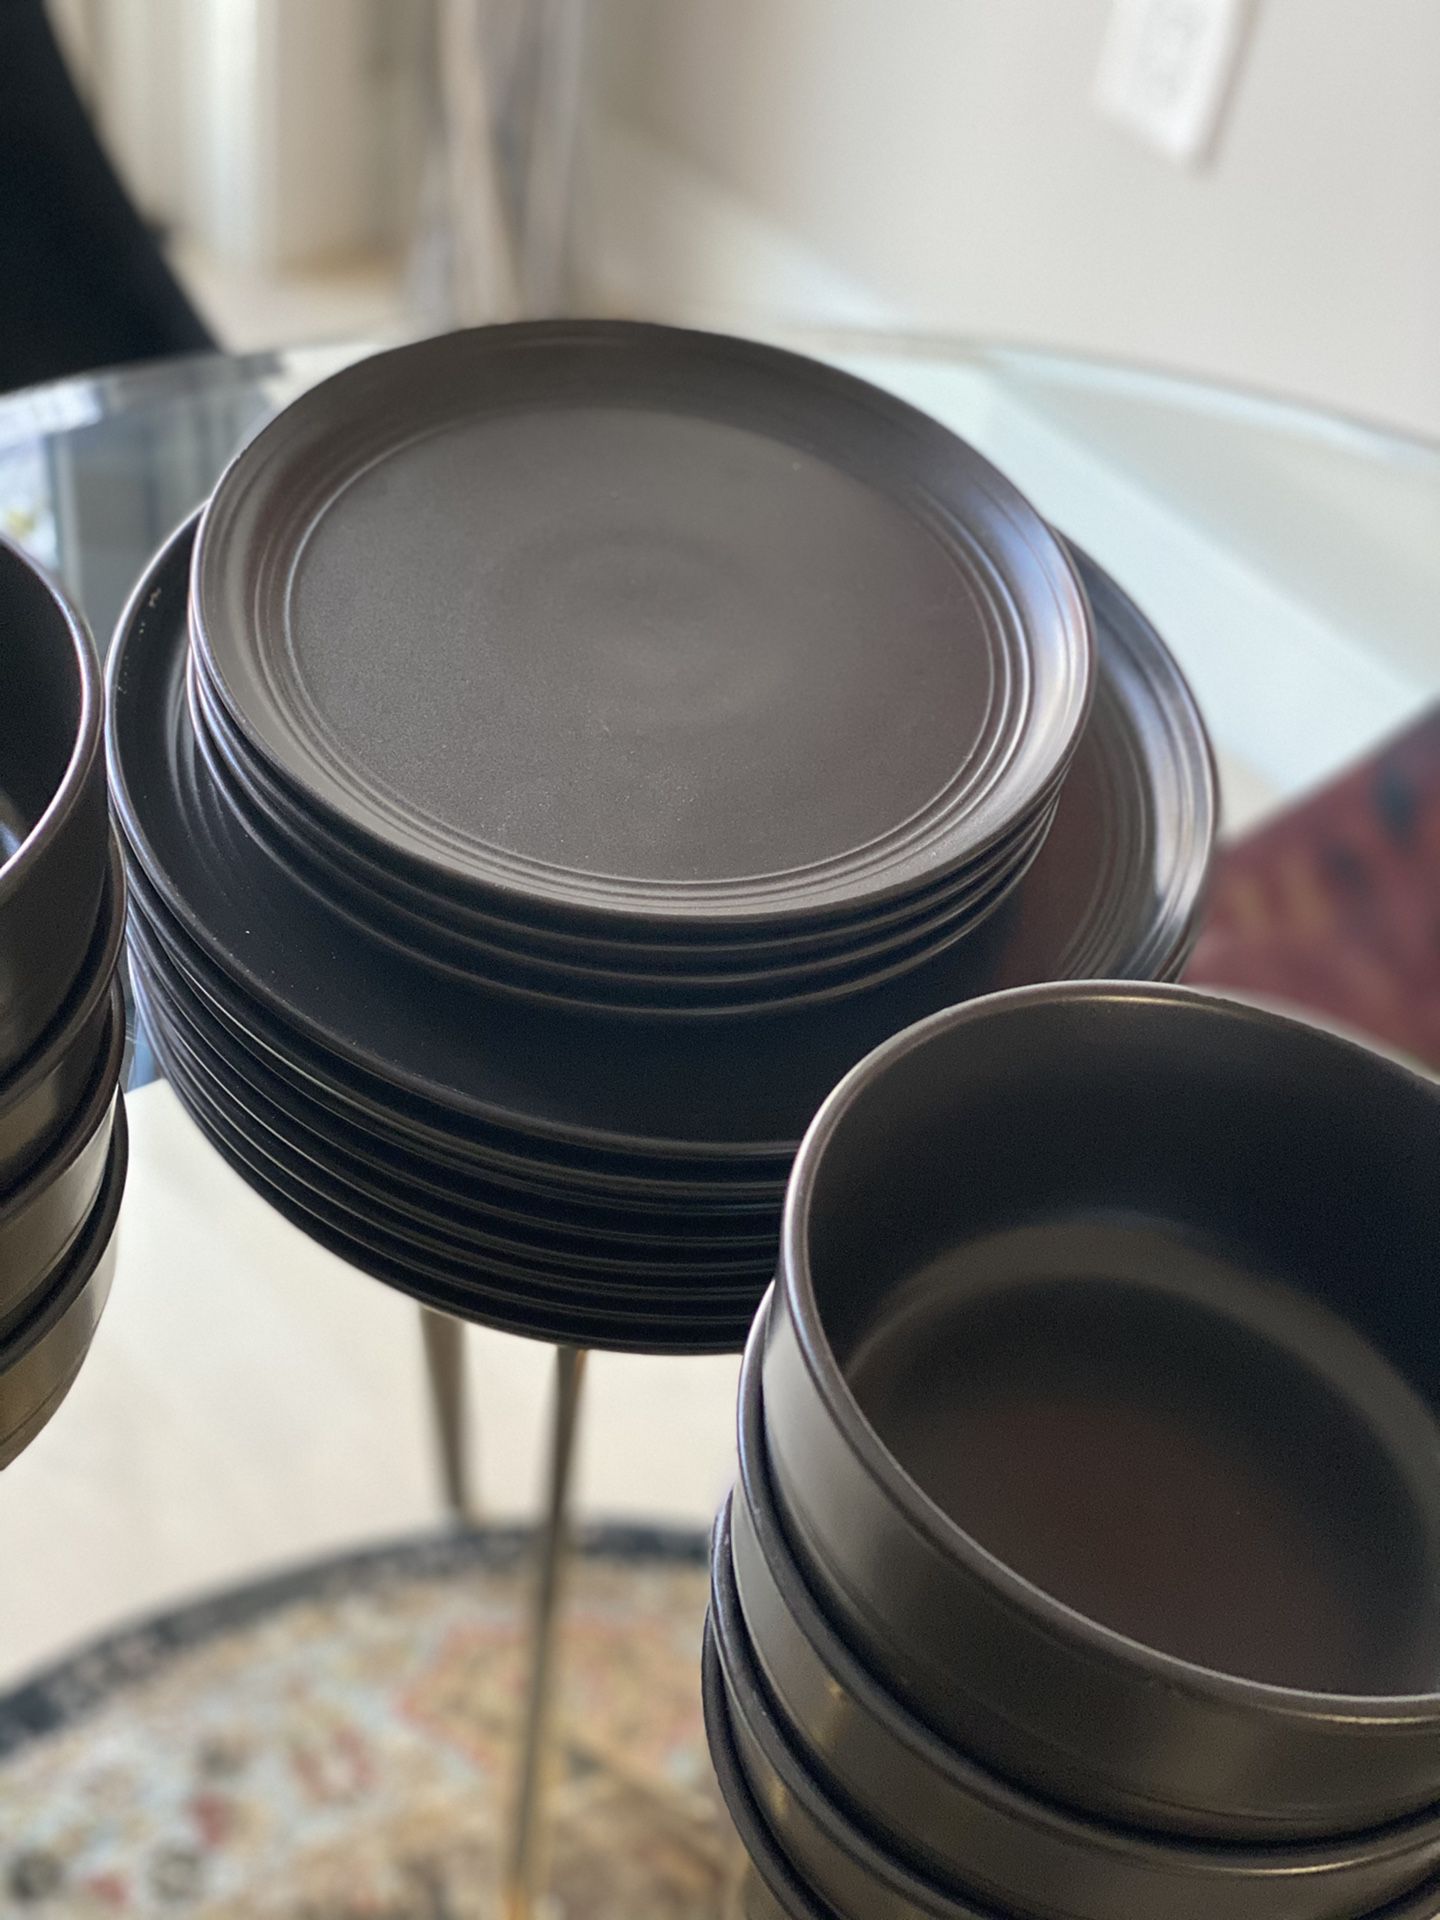 Dinner set of plates and bowls